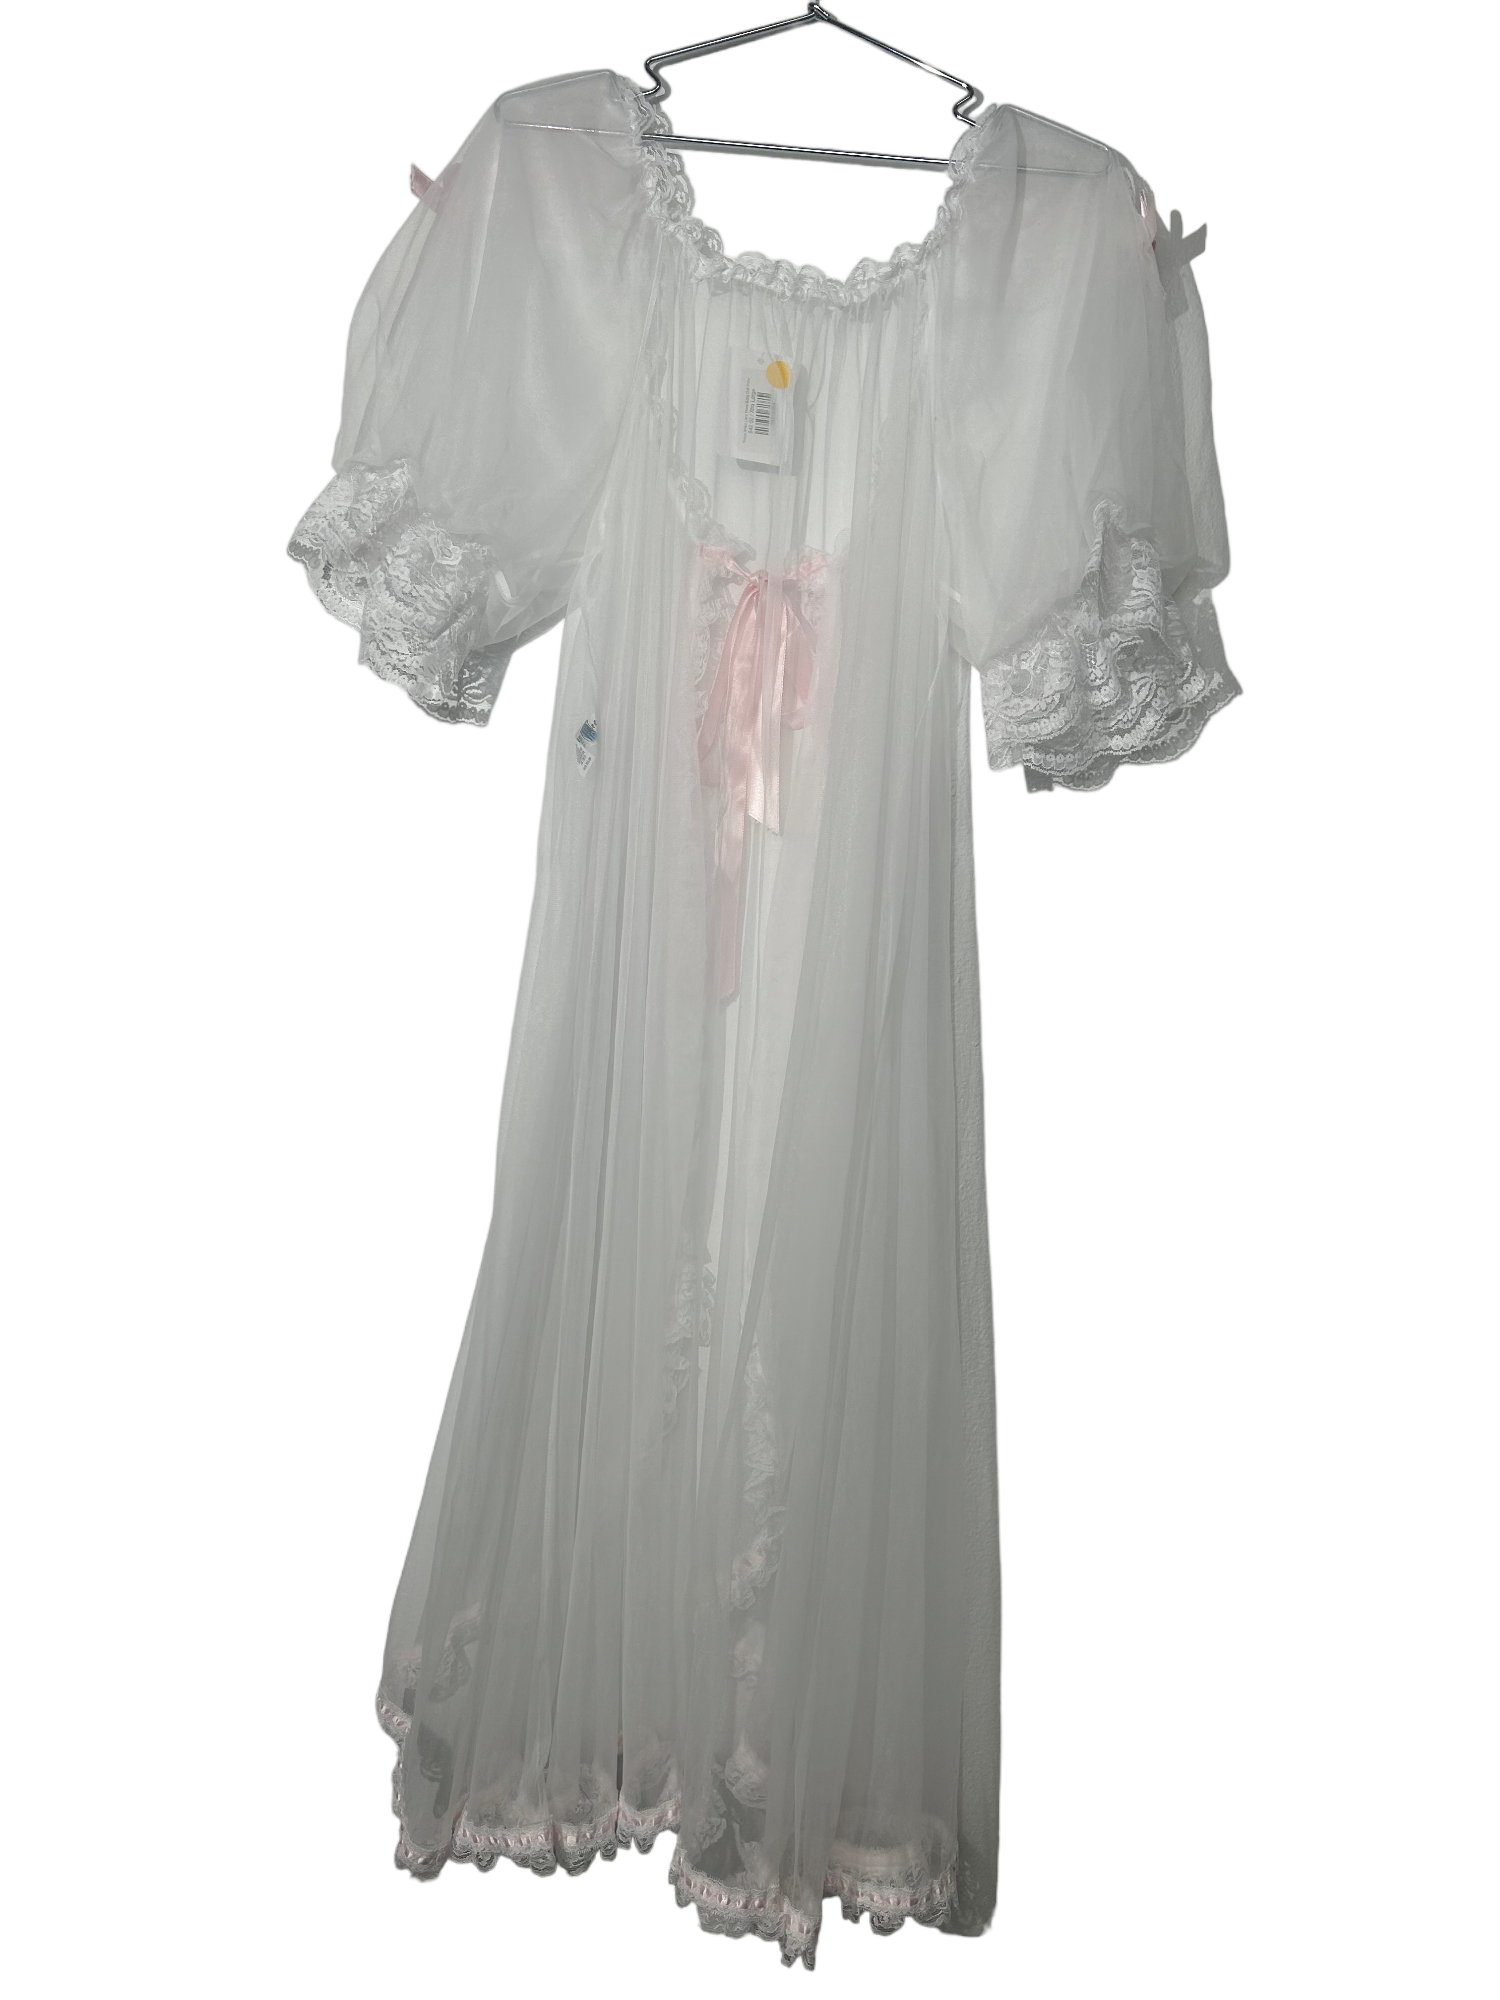 Tosca White Lace Floral Baby Doll Robe